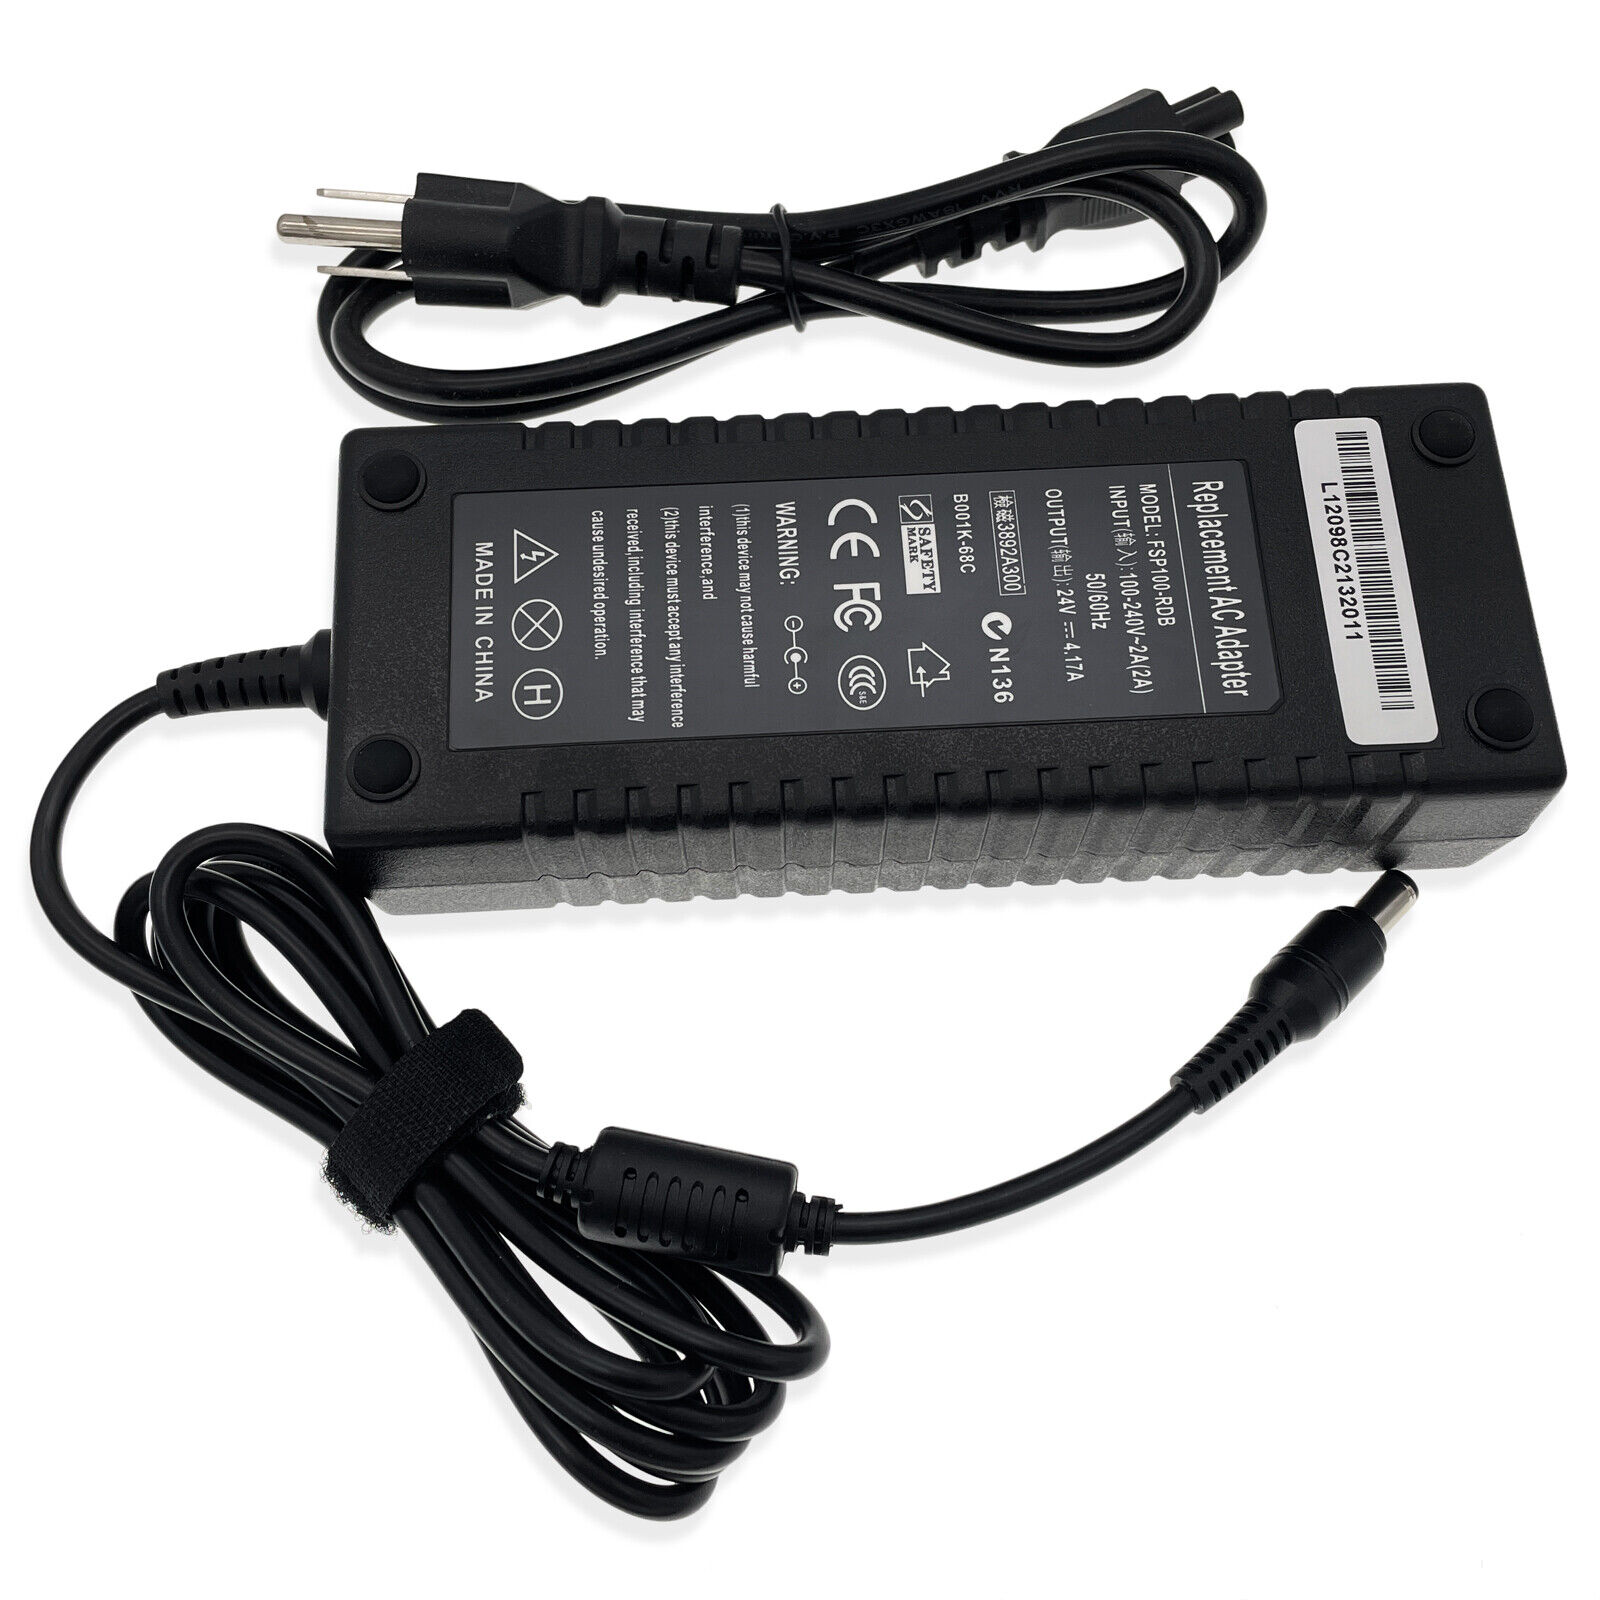 24V 4.17A AC Adapter Power Charger For Zebra P/N 808101-001 9NA1000100 Printer Brand Unbranded/Generic Color Black Comp